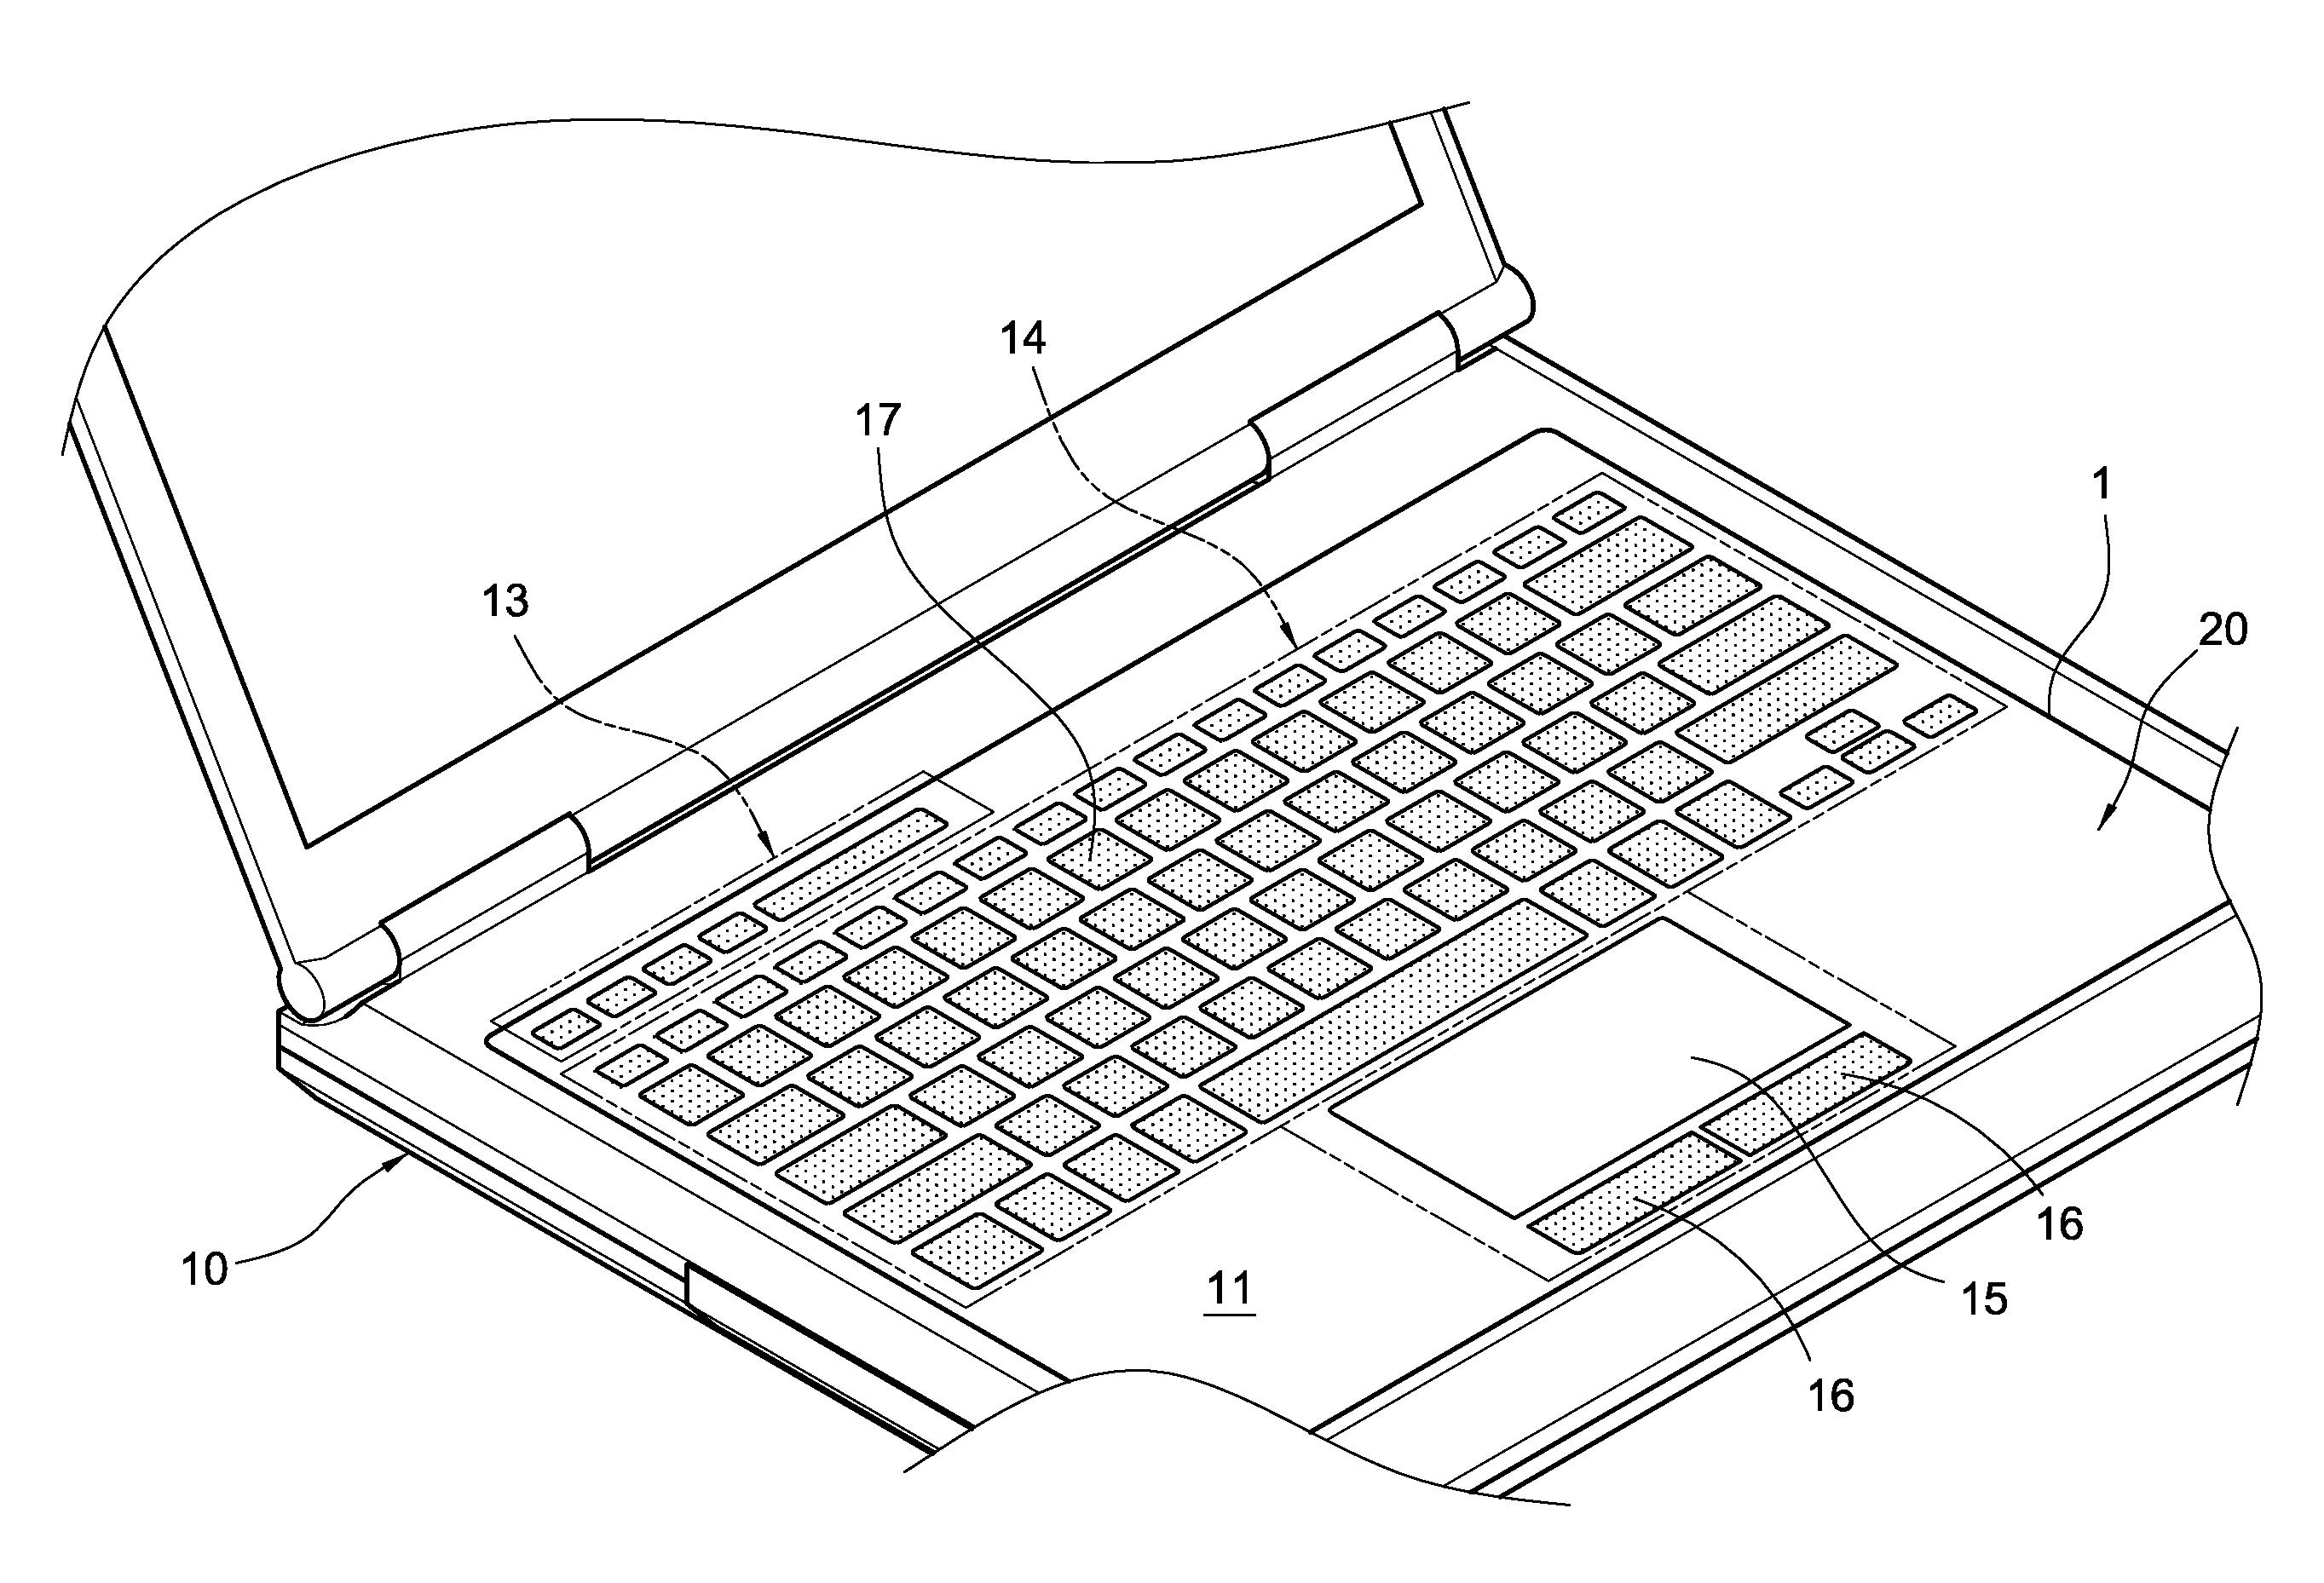 Membrane touch keyboard structure for notebook computers